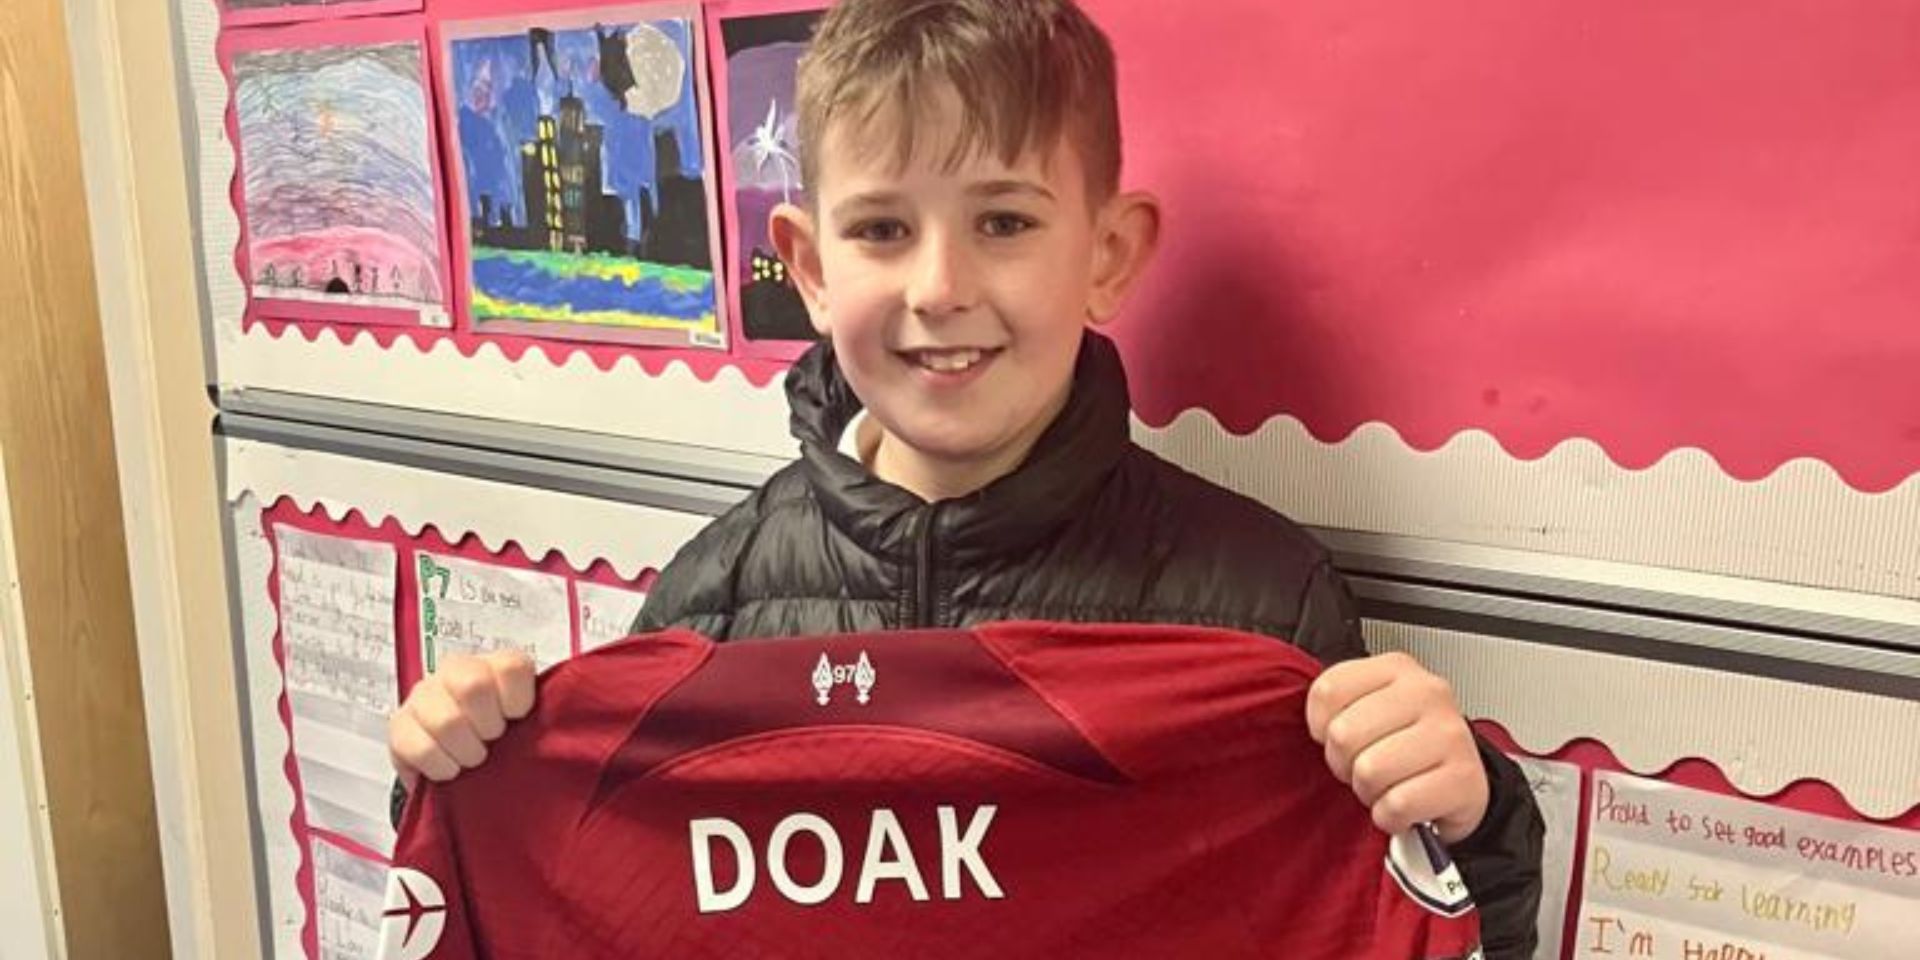 (Image) Ben Doak’s little brother proudly shows off his first Premier League shirt